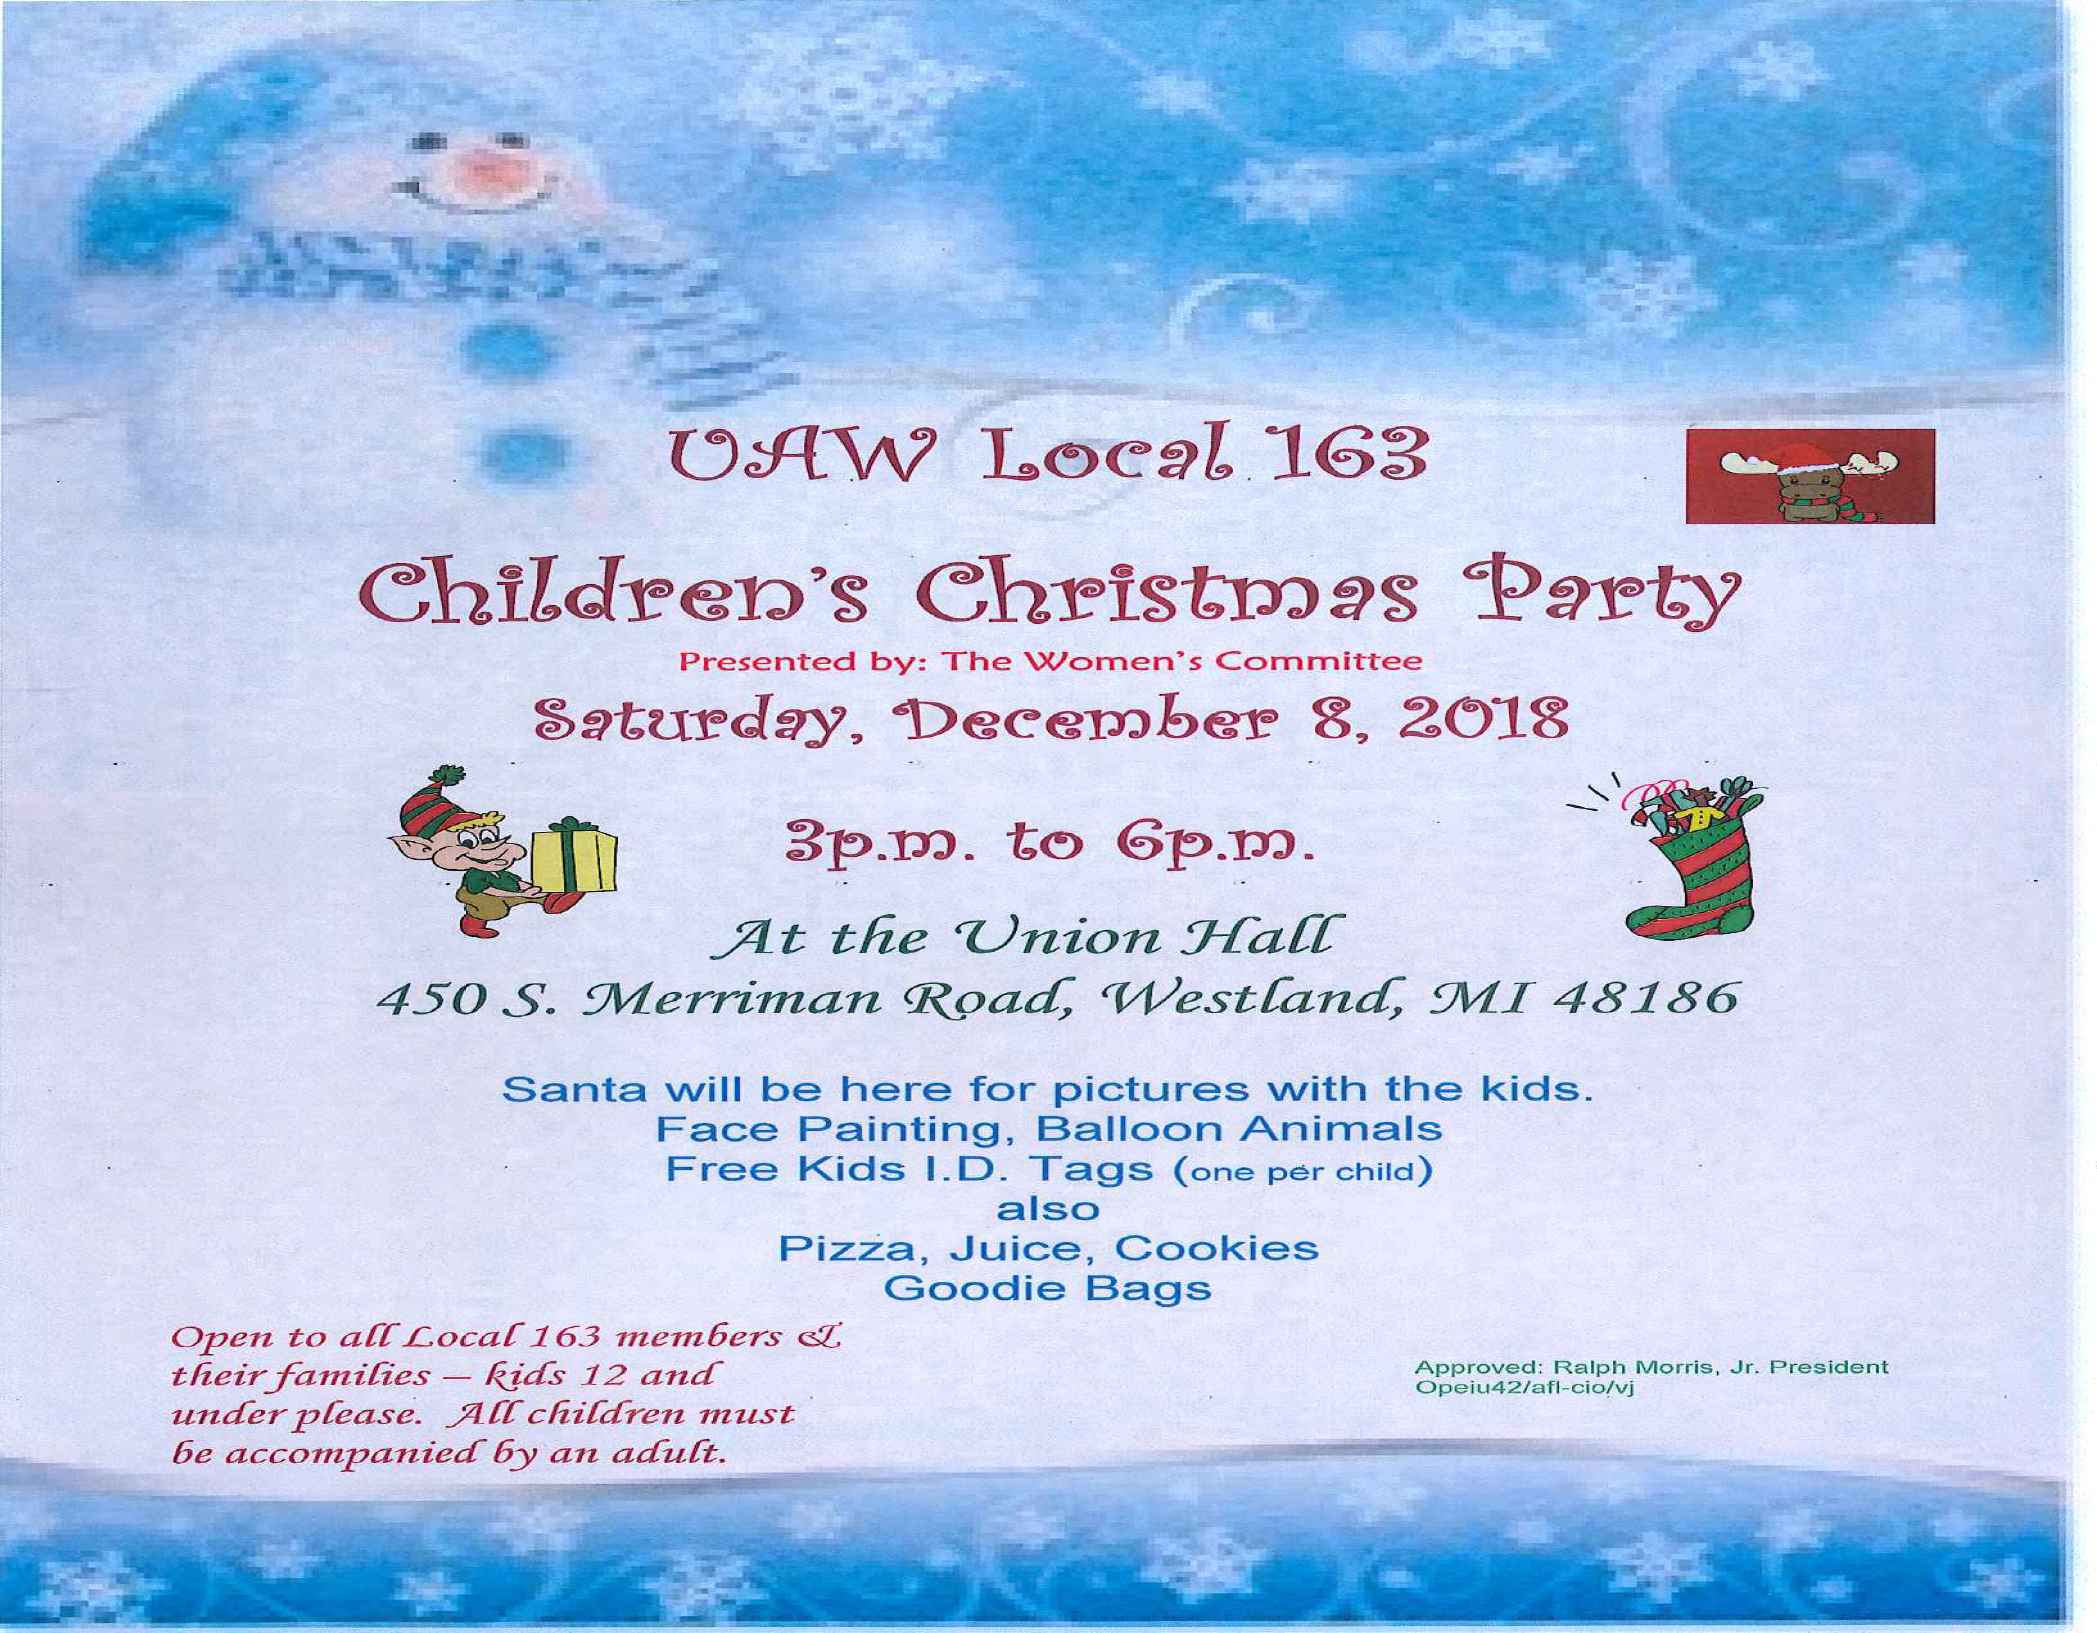 Children's Christmas Party | UAW Local 163